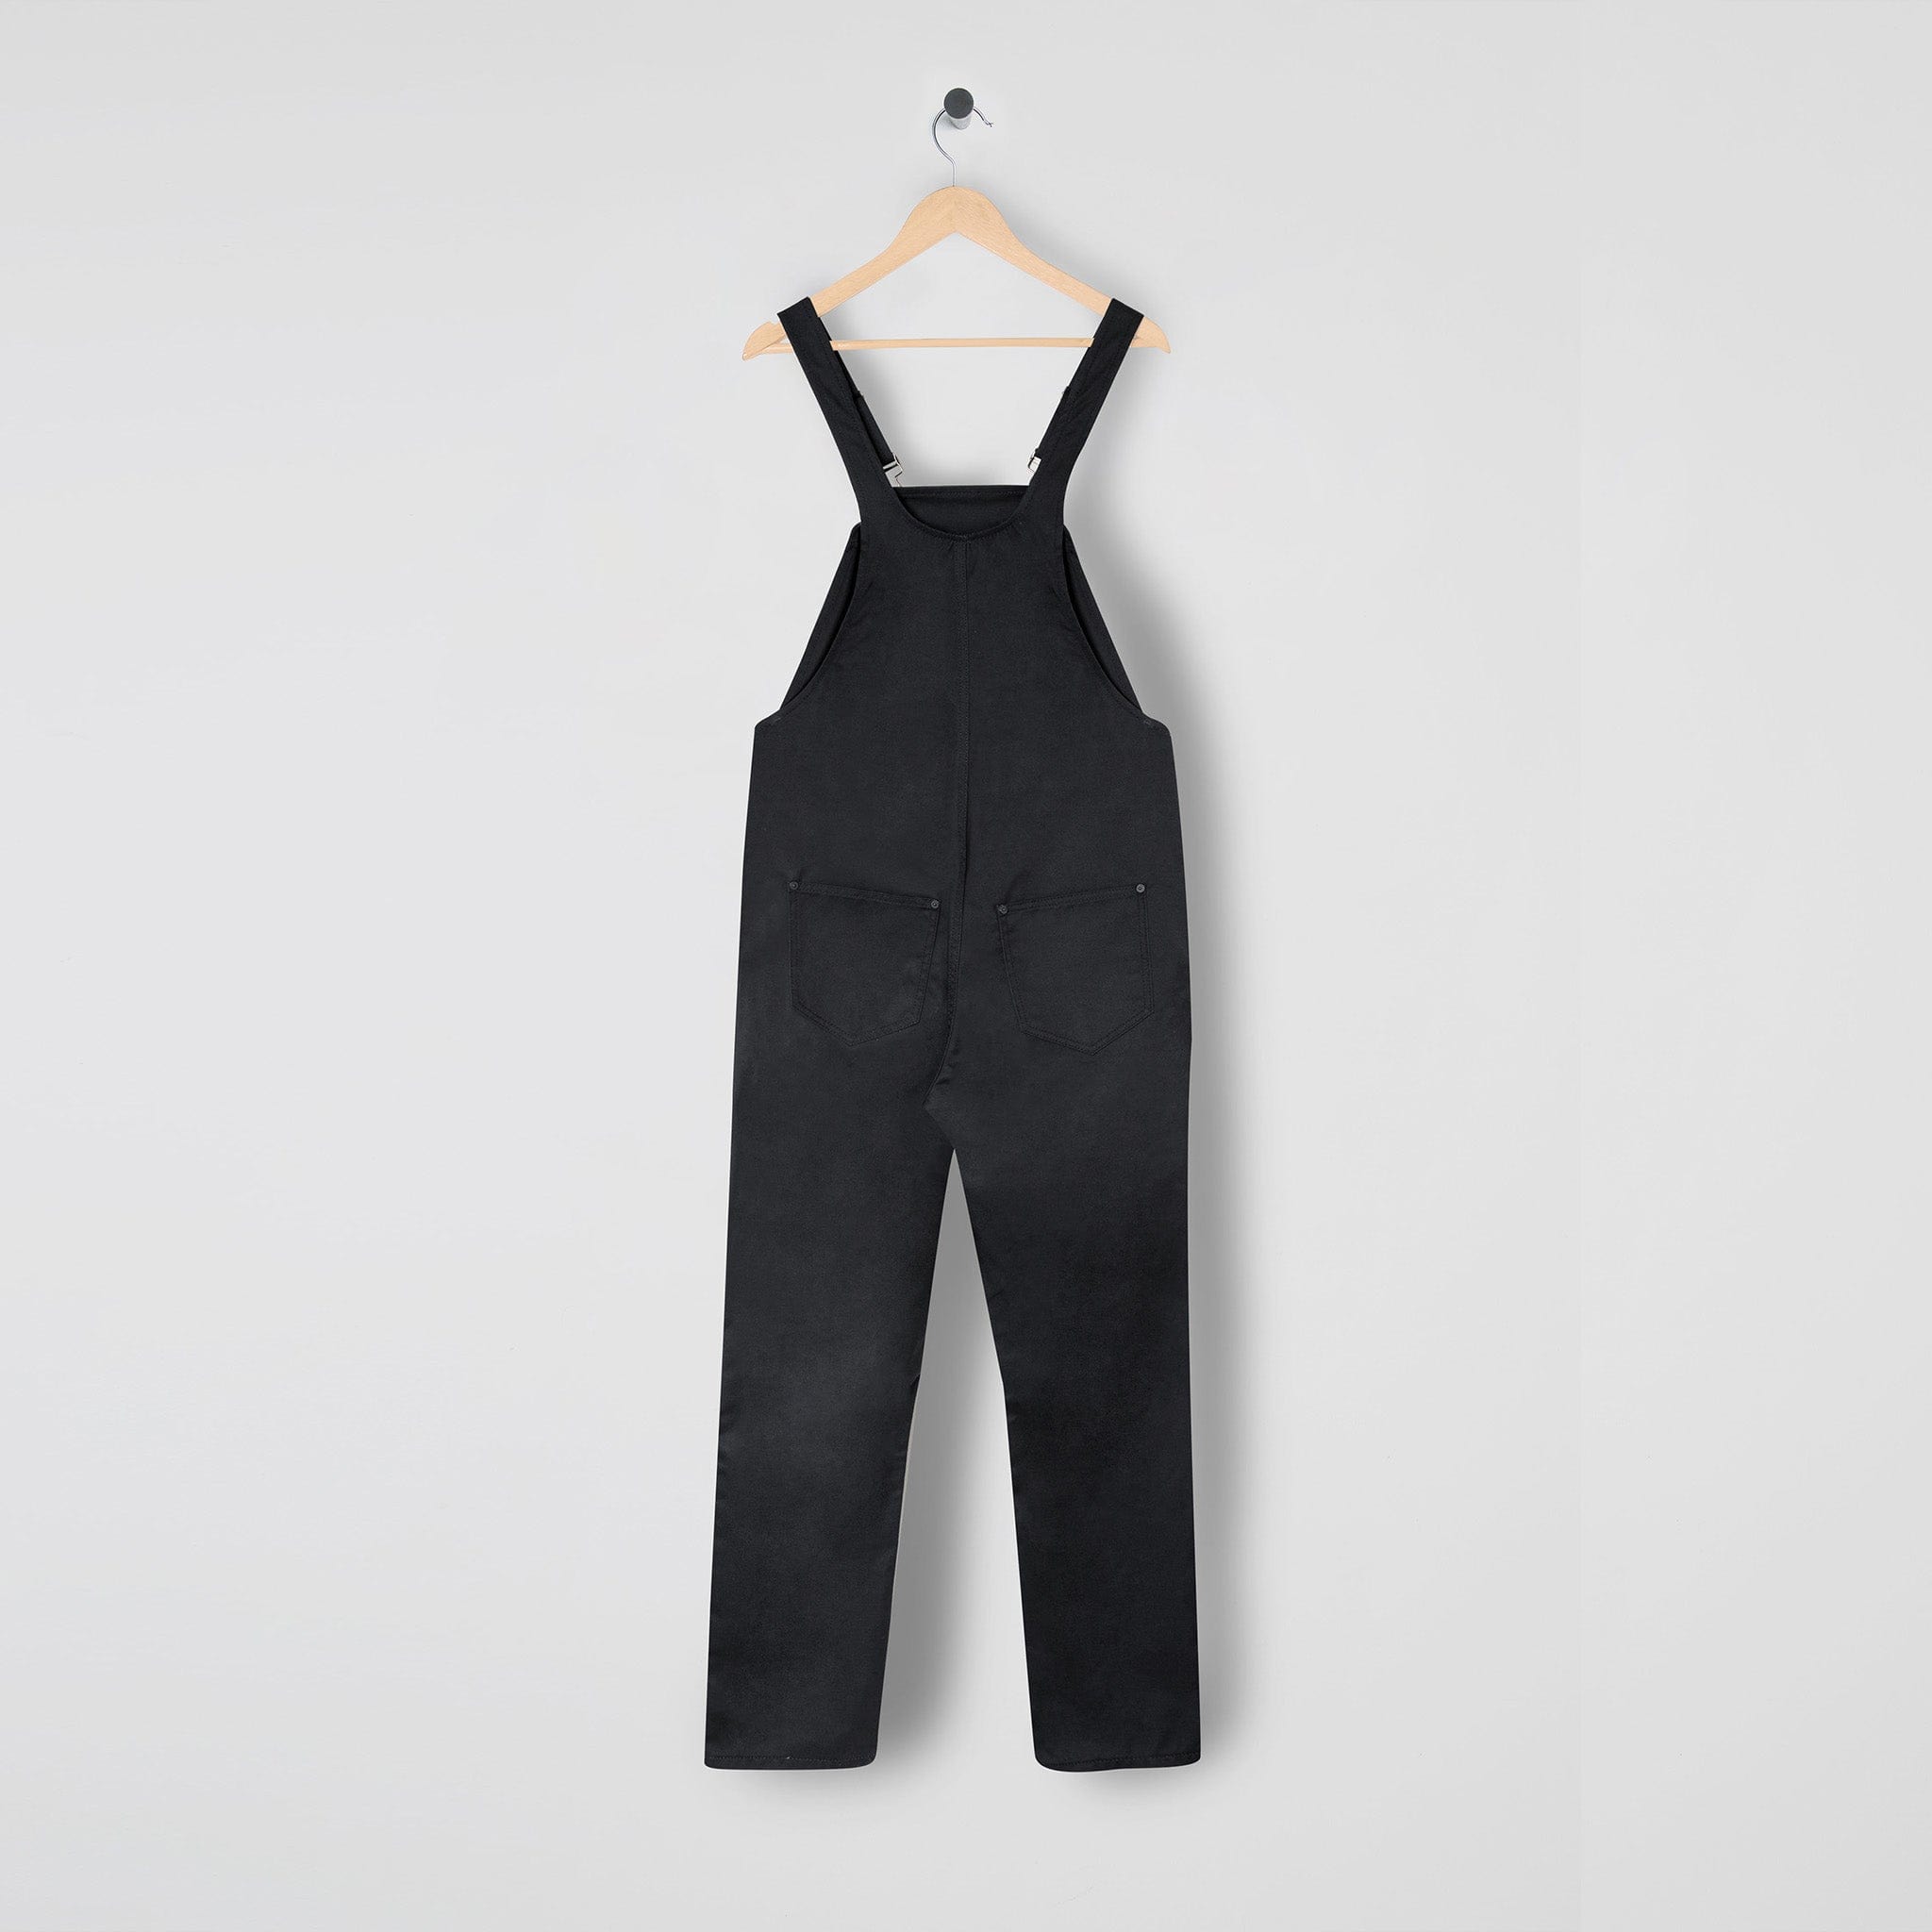 Timeless and Durable M.C.O&#39;s Polycotton Black Dungarees for Men and Women.